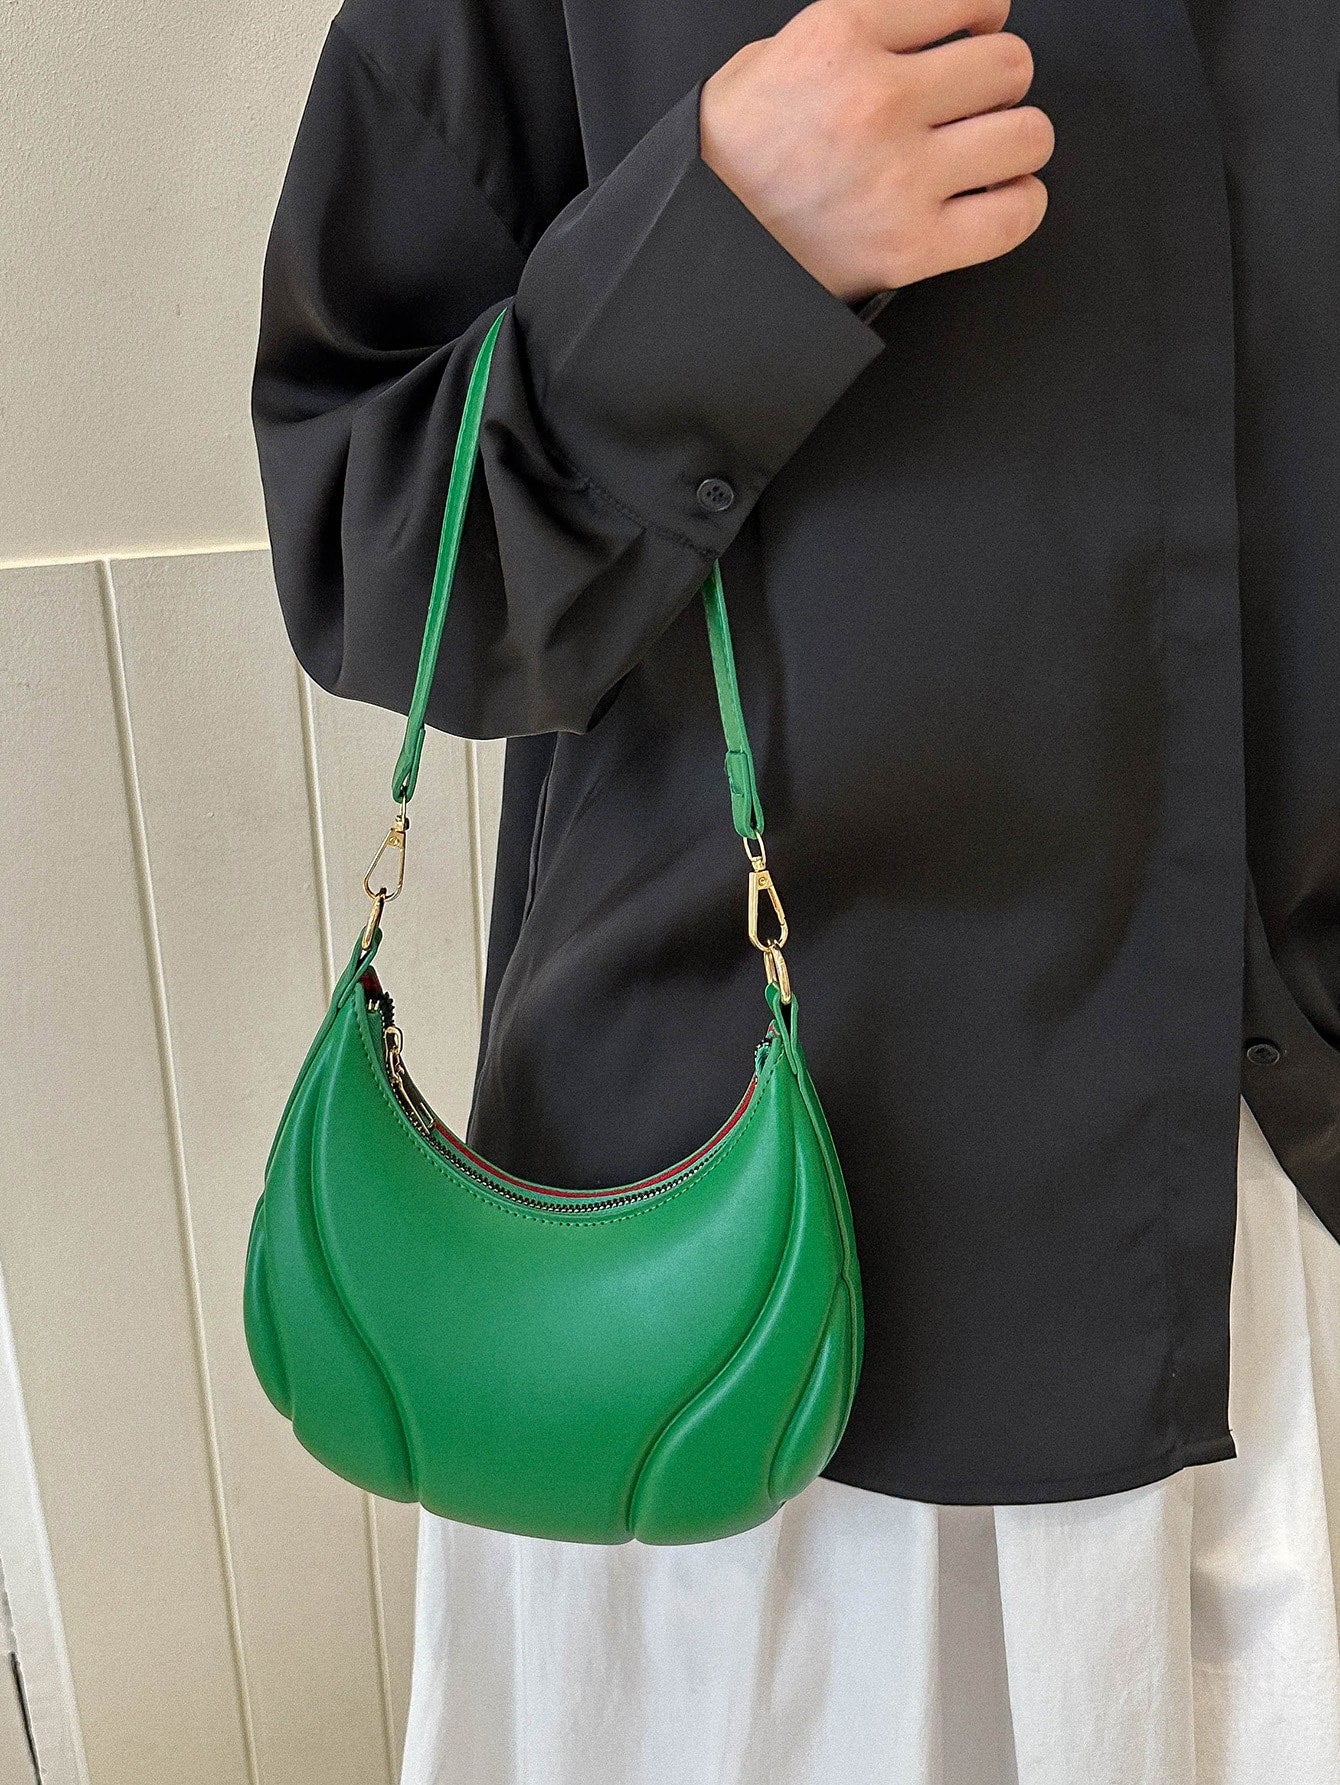 1pc Embossed Green Pu Leather Portable And Fashionable Solid Color Single-shoulder Bag For Ladies Daily Use